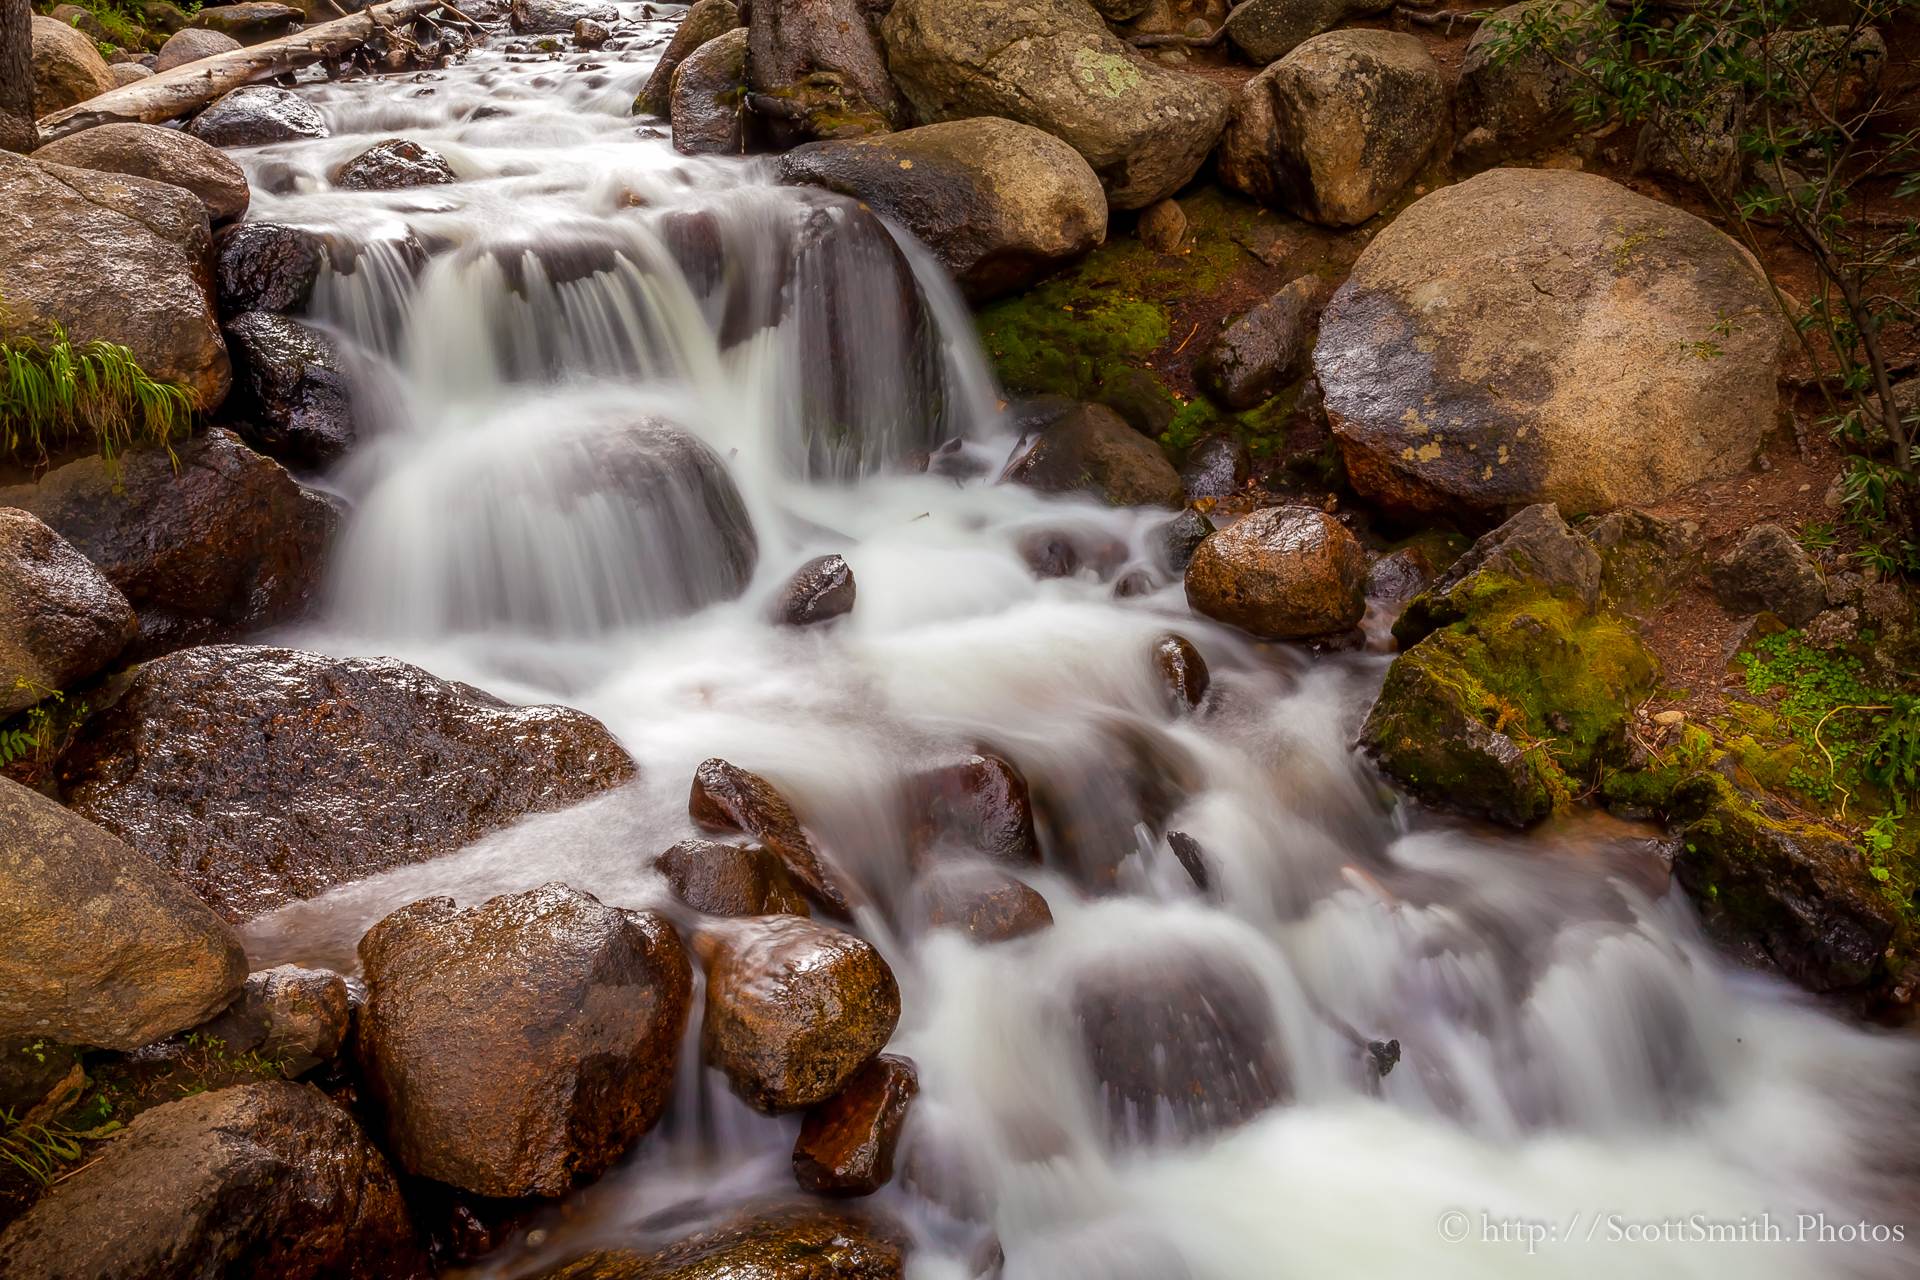 Mt Evans Waterfall A small stream trickles down the side of the mountain. by Scott Smith Photos